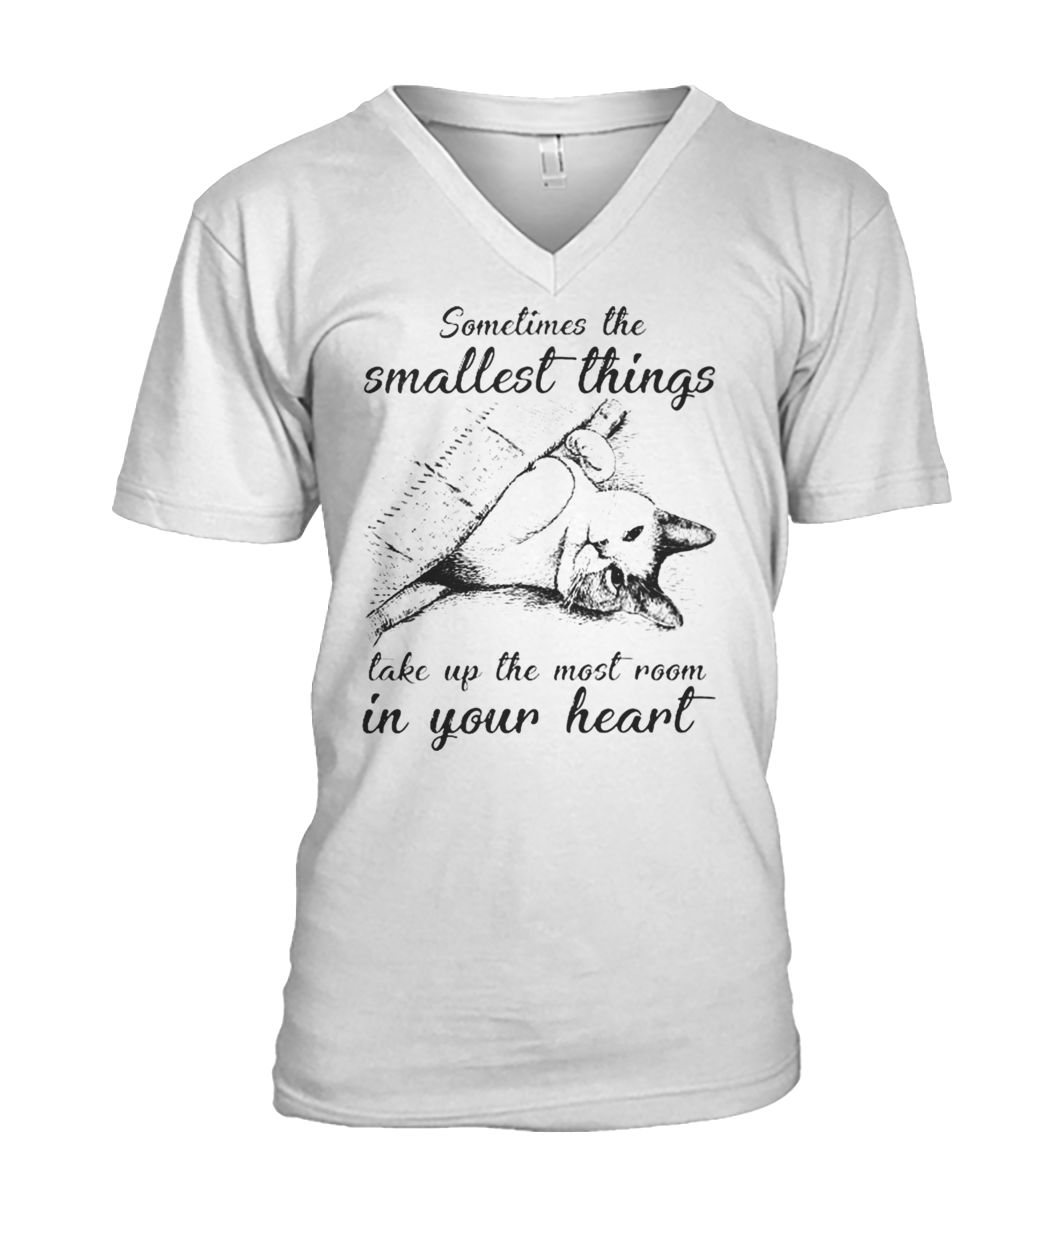 Cat sometimes the smallest things lake up the most room in your heart mens v-neck